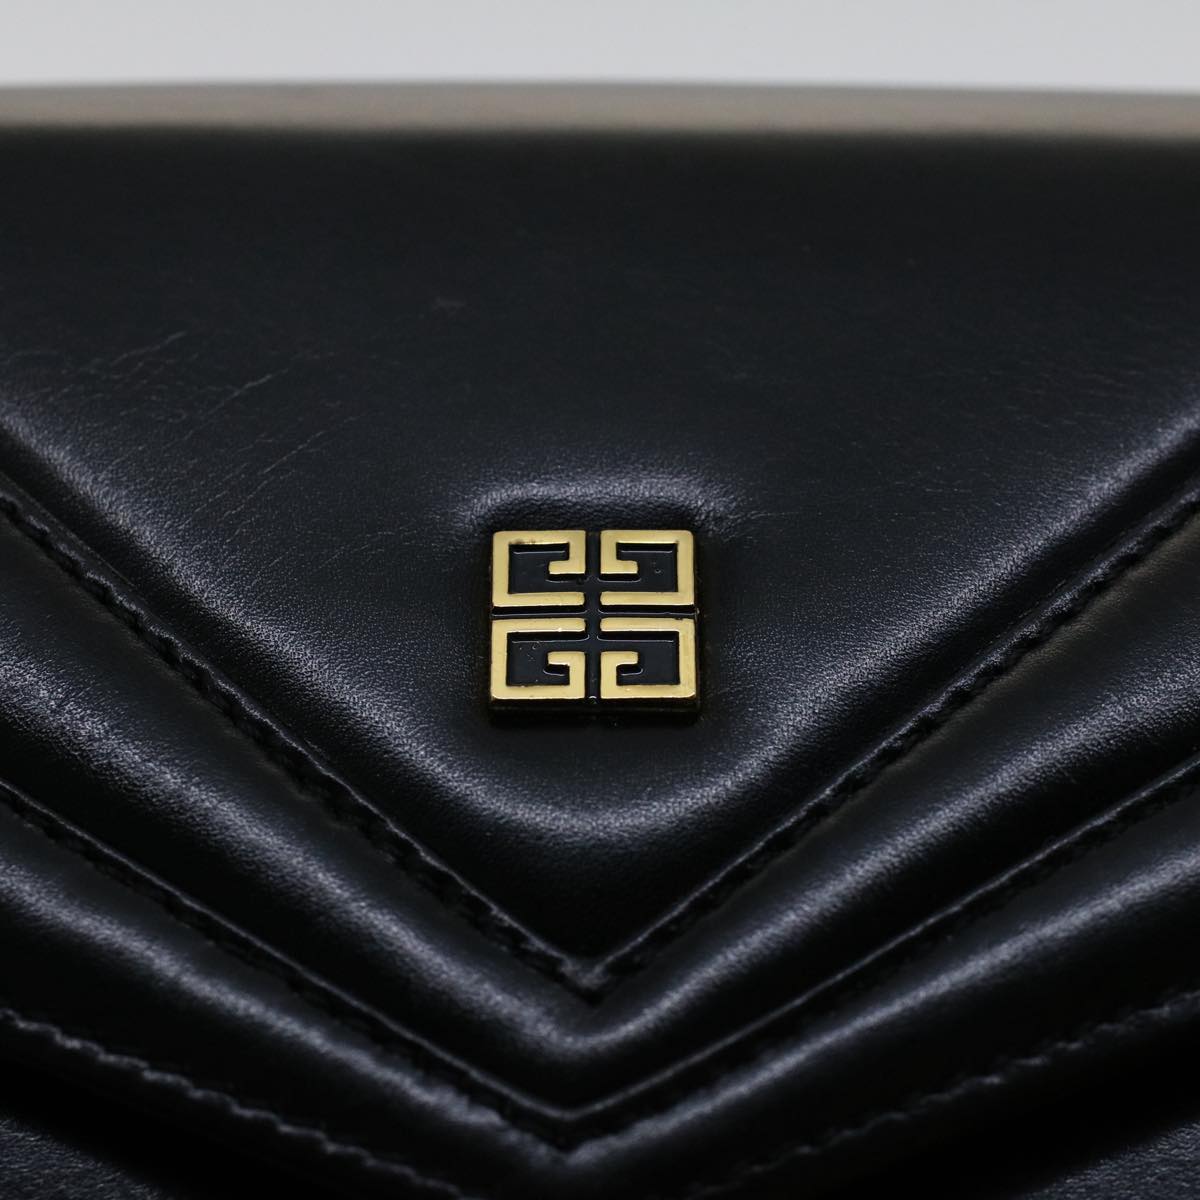 GIVENCHY Chain Shoulder Bag Leather Black Auth 50520